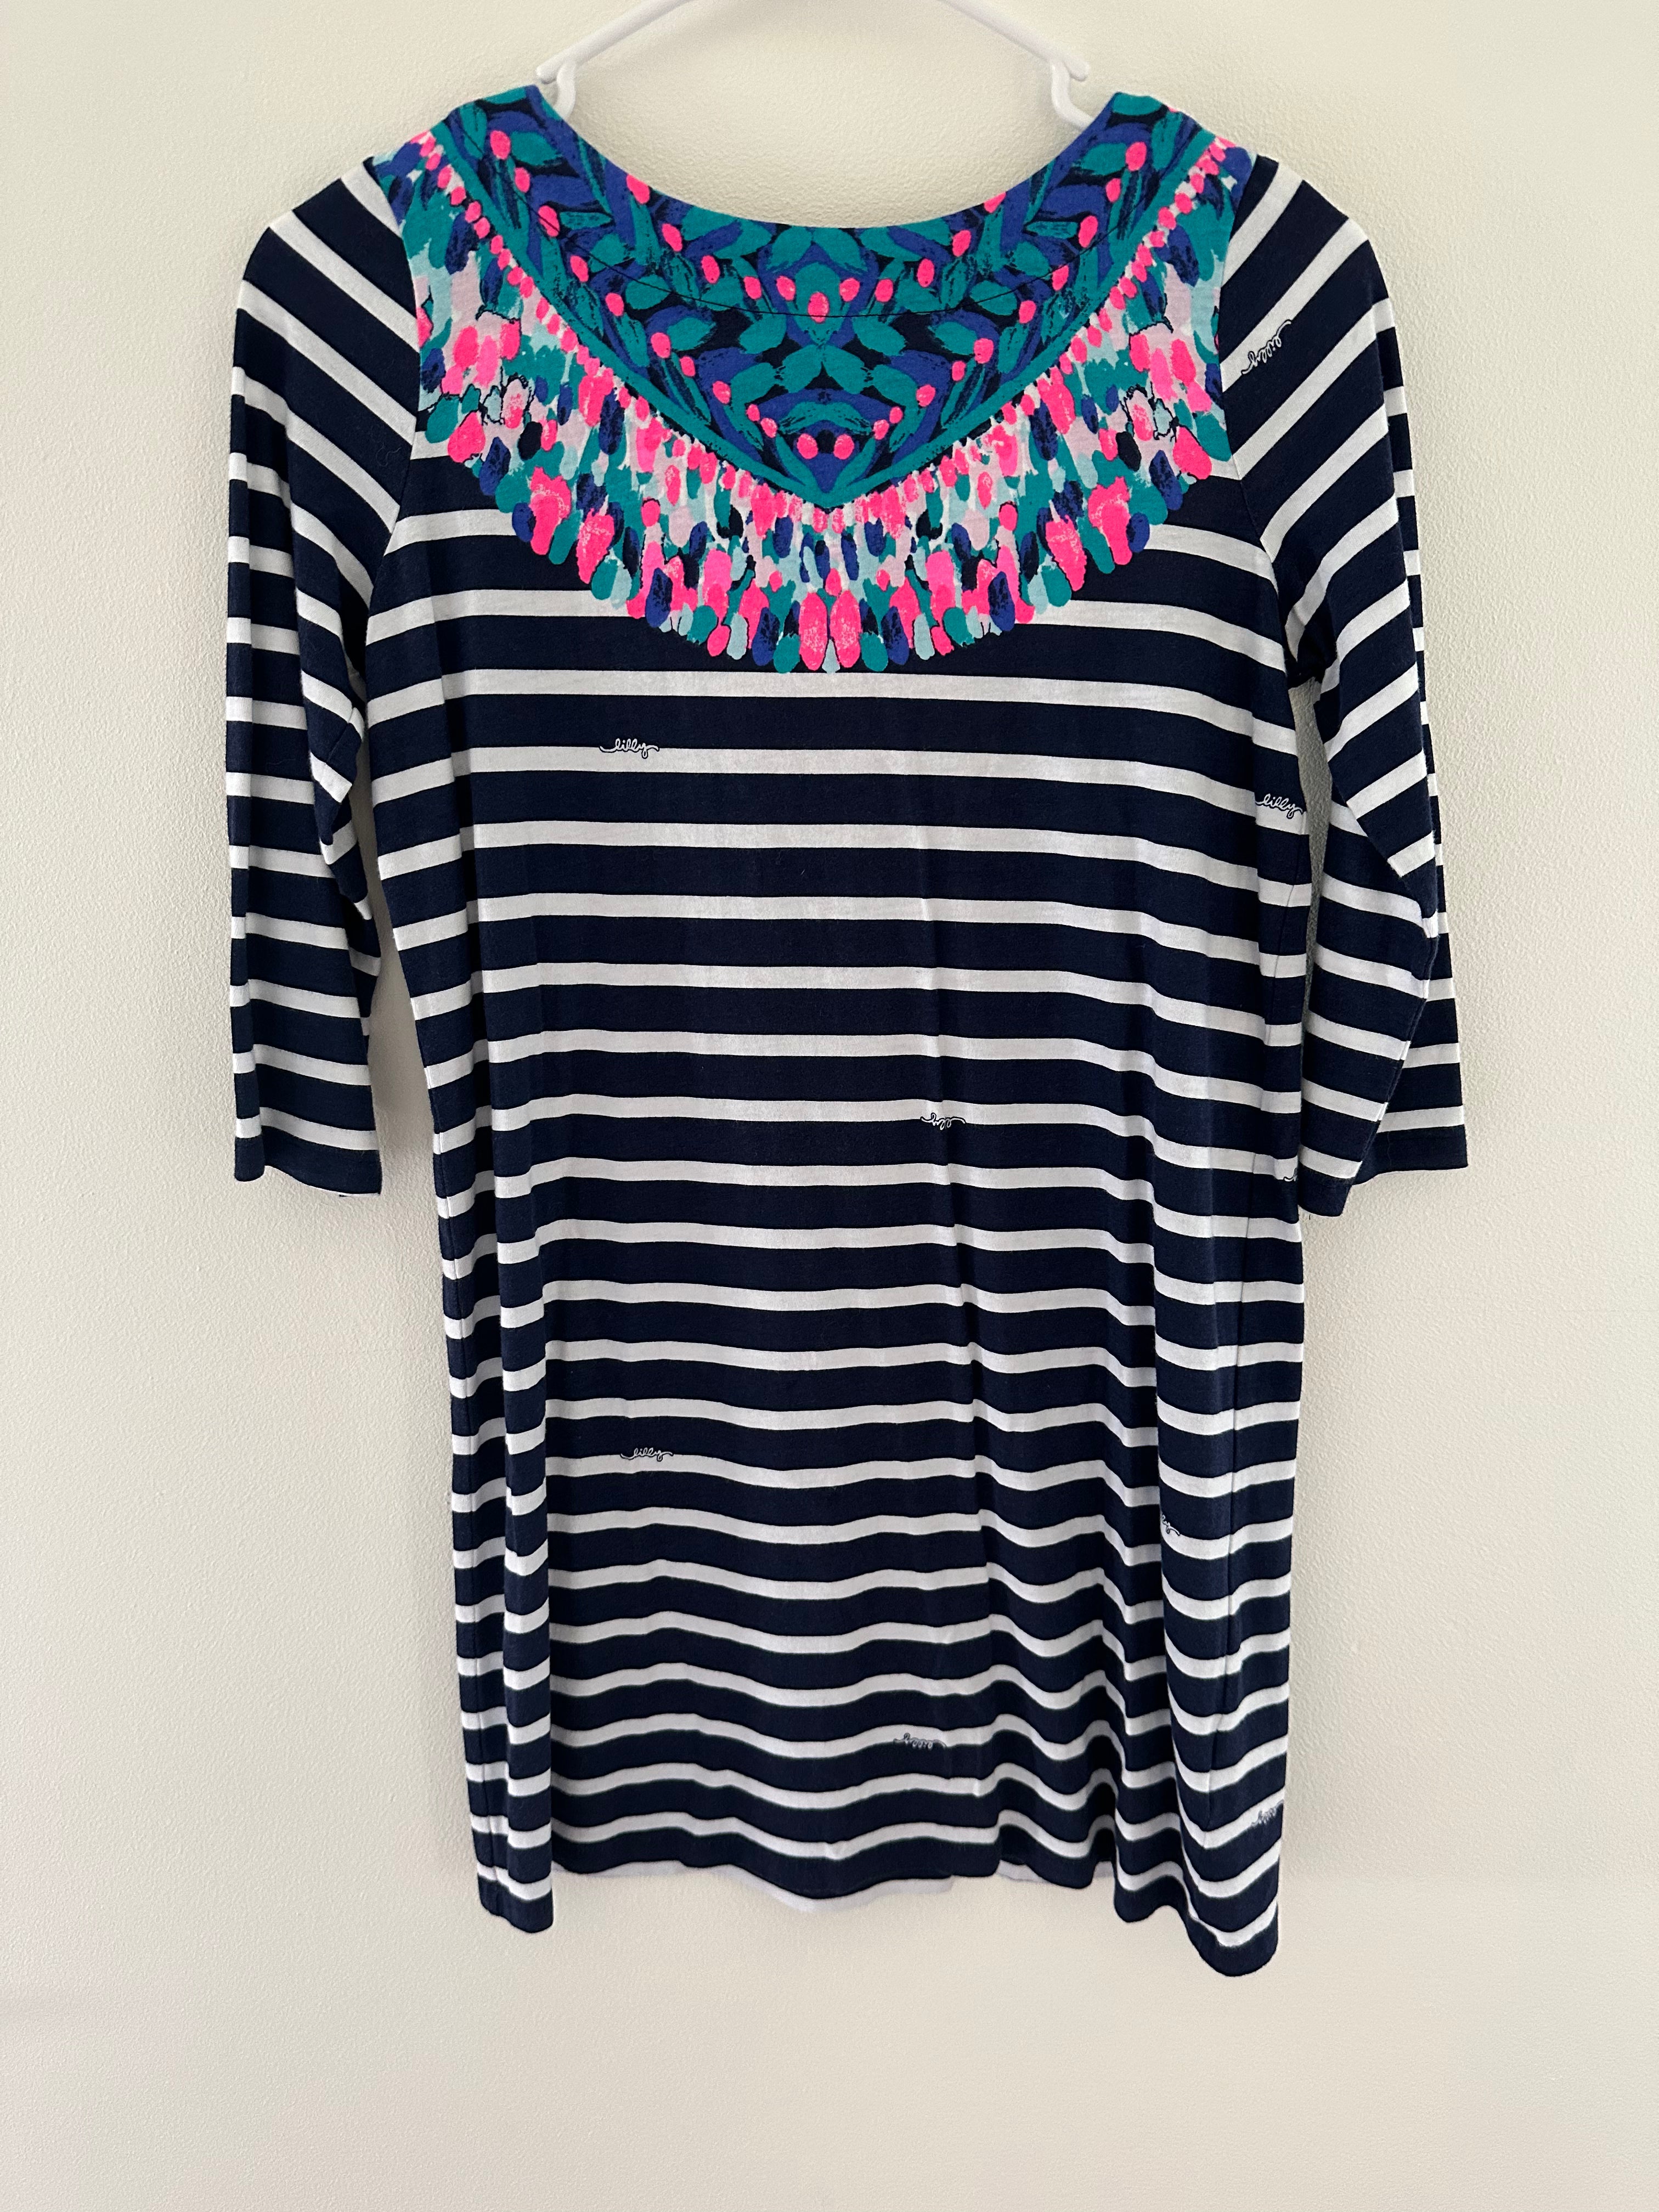 Lilly Pulitzer Long Sleeve Dress, Navy/Pink Girls Size XL